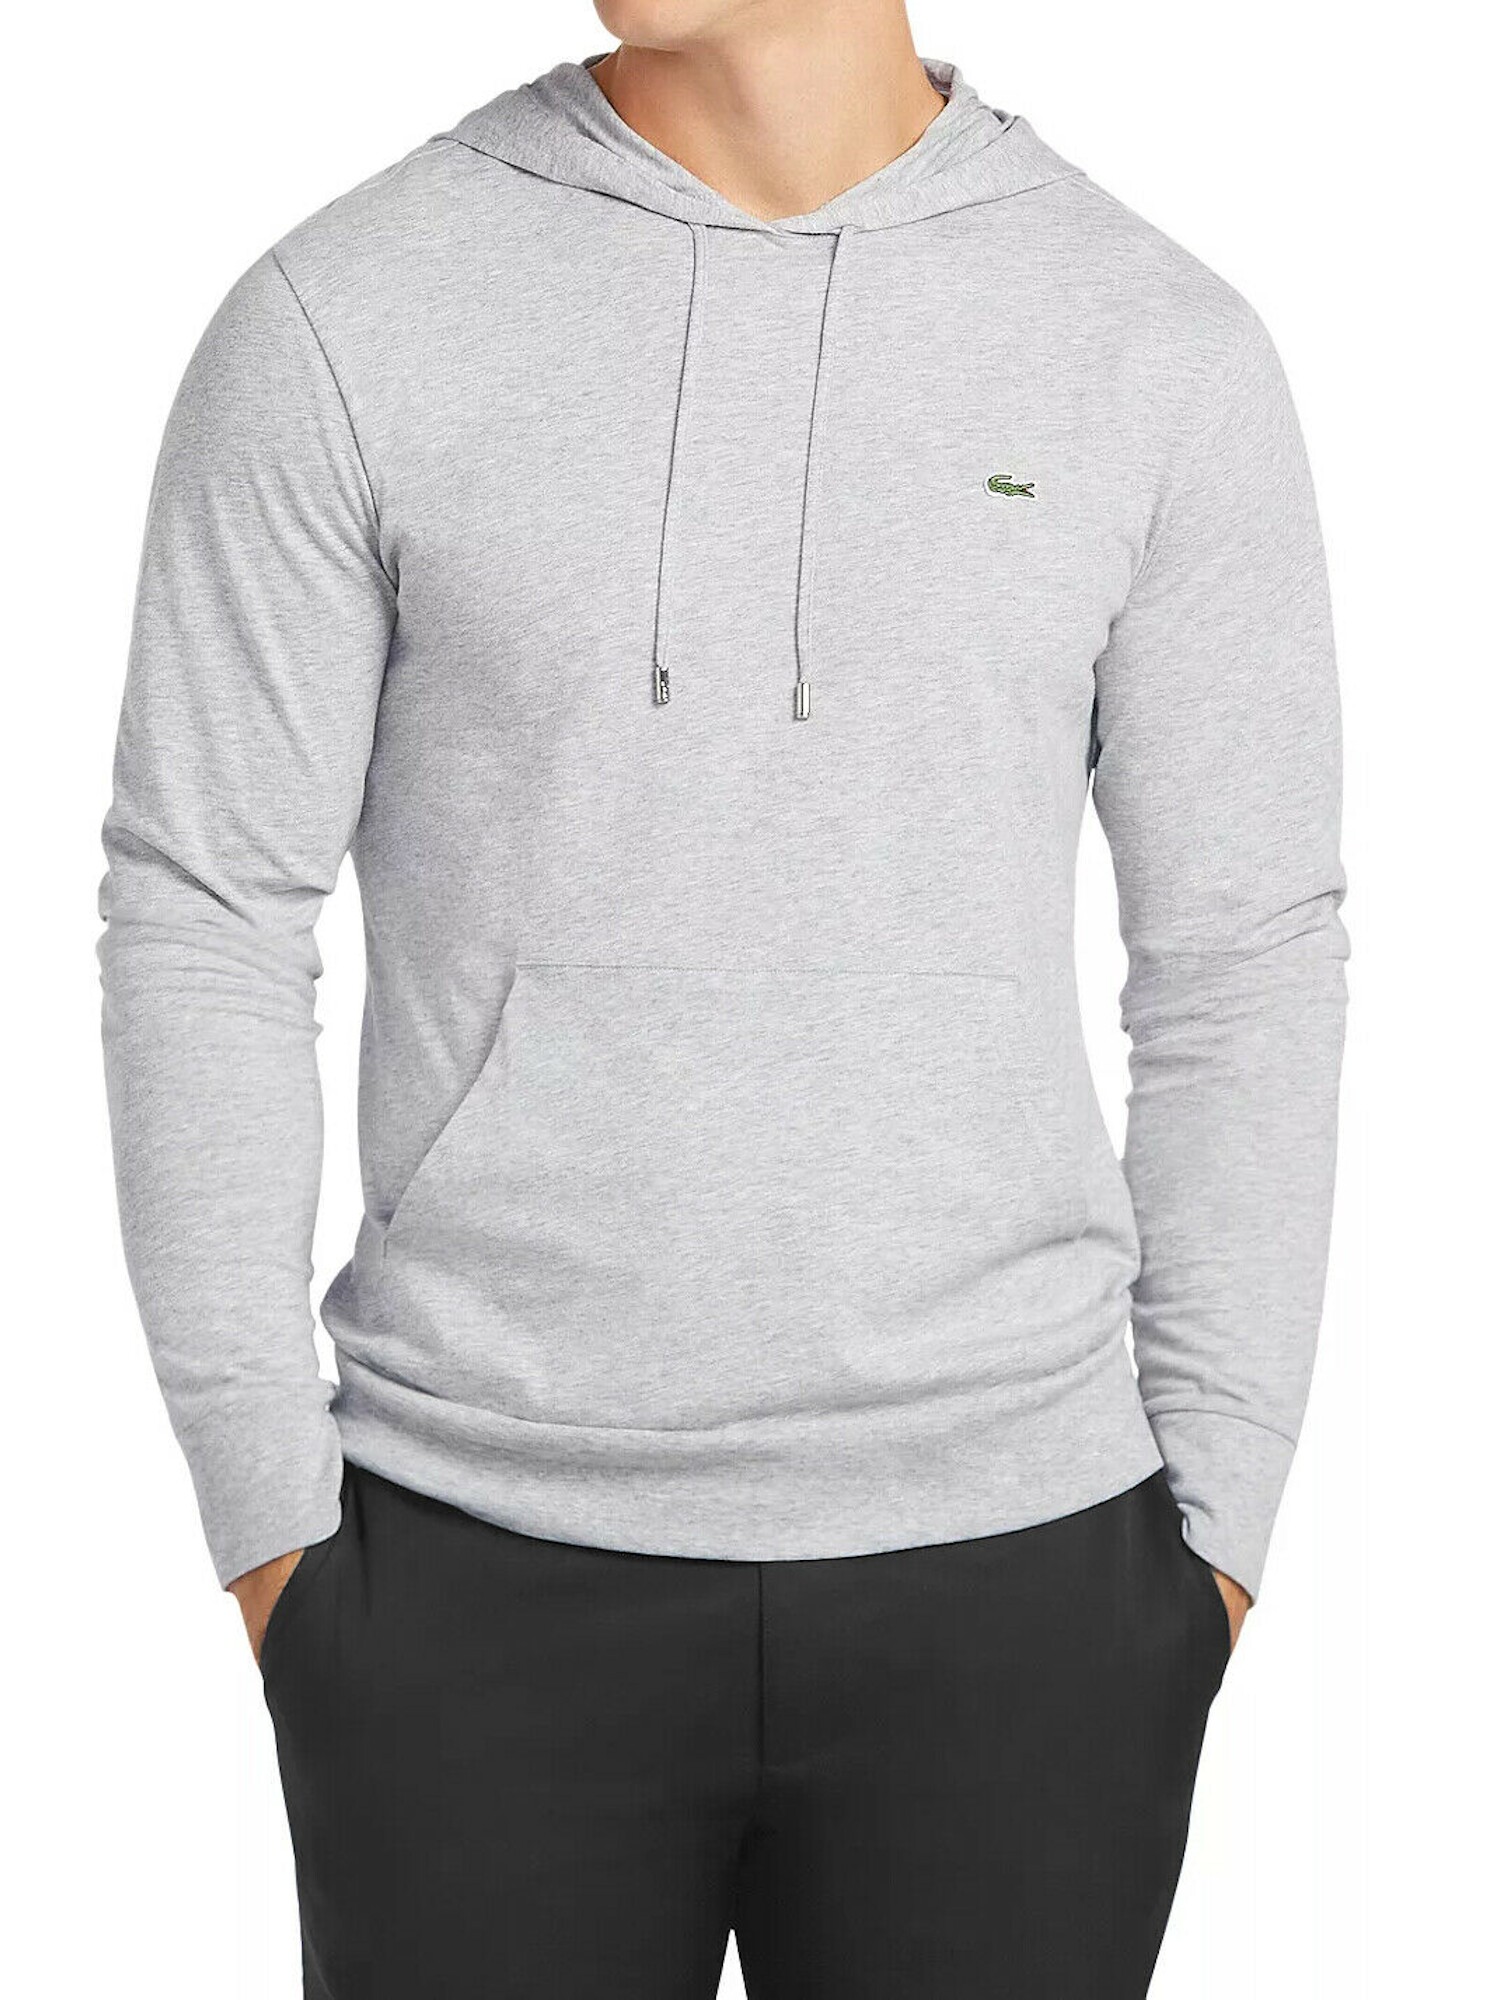 LACOSTE Mens Graphic Long Sleeve Classic Fit Hoodie 3XL - Walmart.com